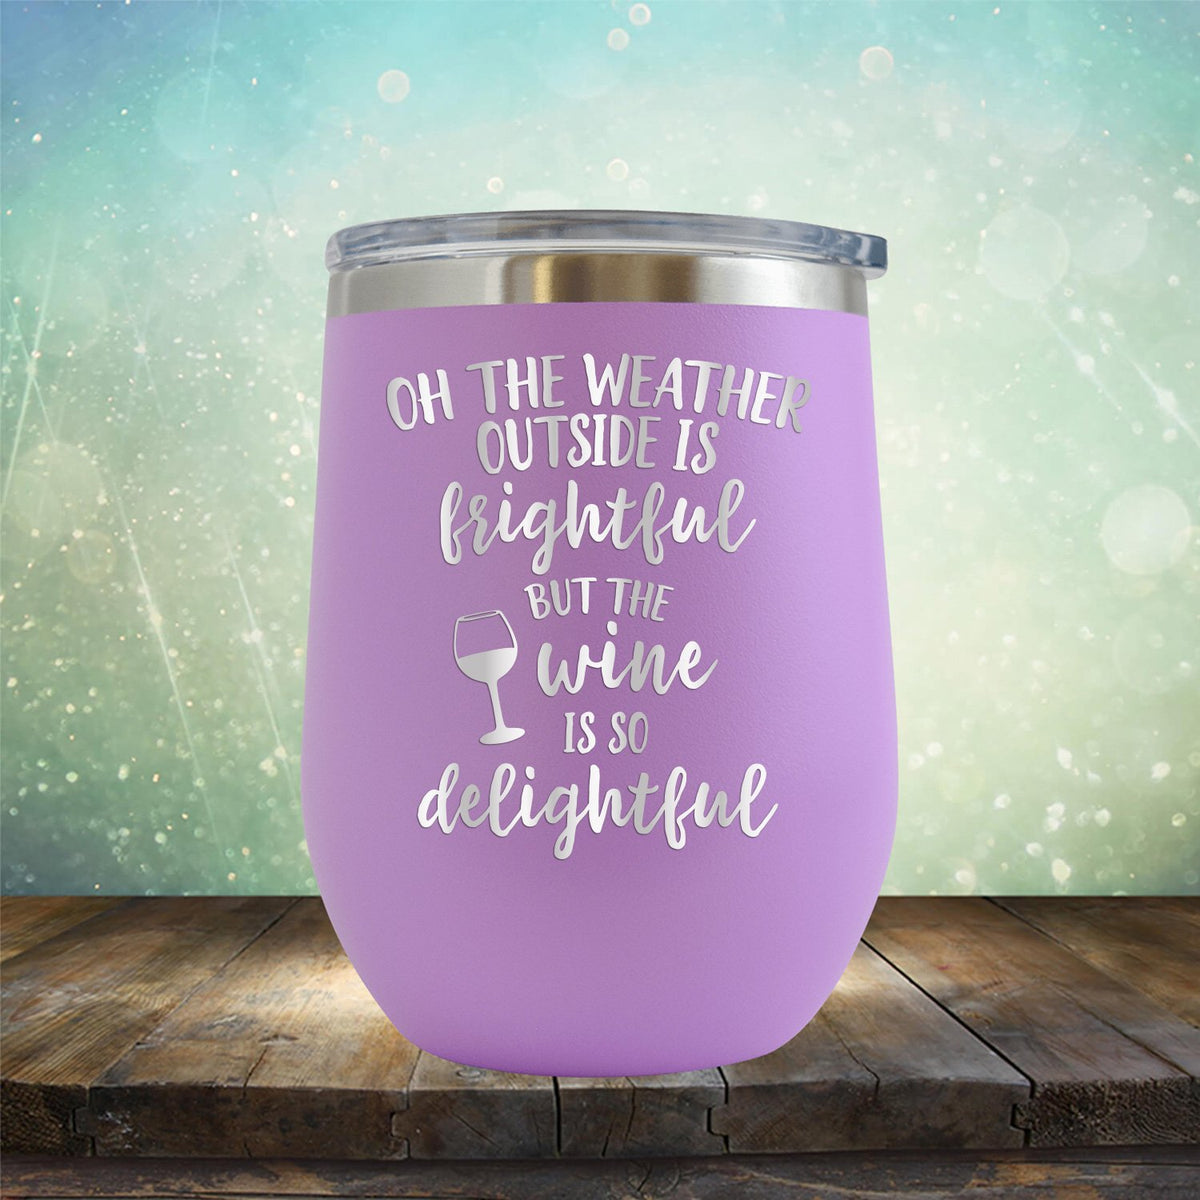 Oh The Weather Outside is Frightful But The Wine is So Delightful - Stemless Wine Cup